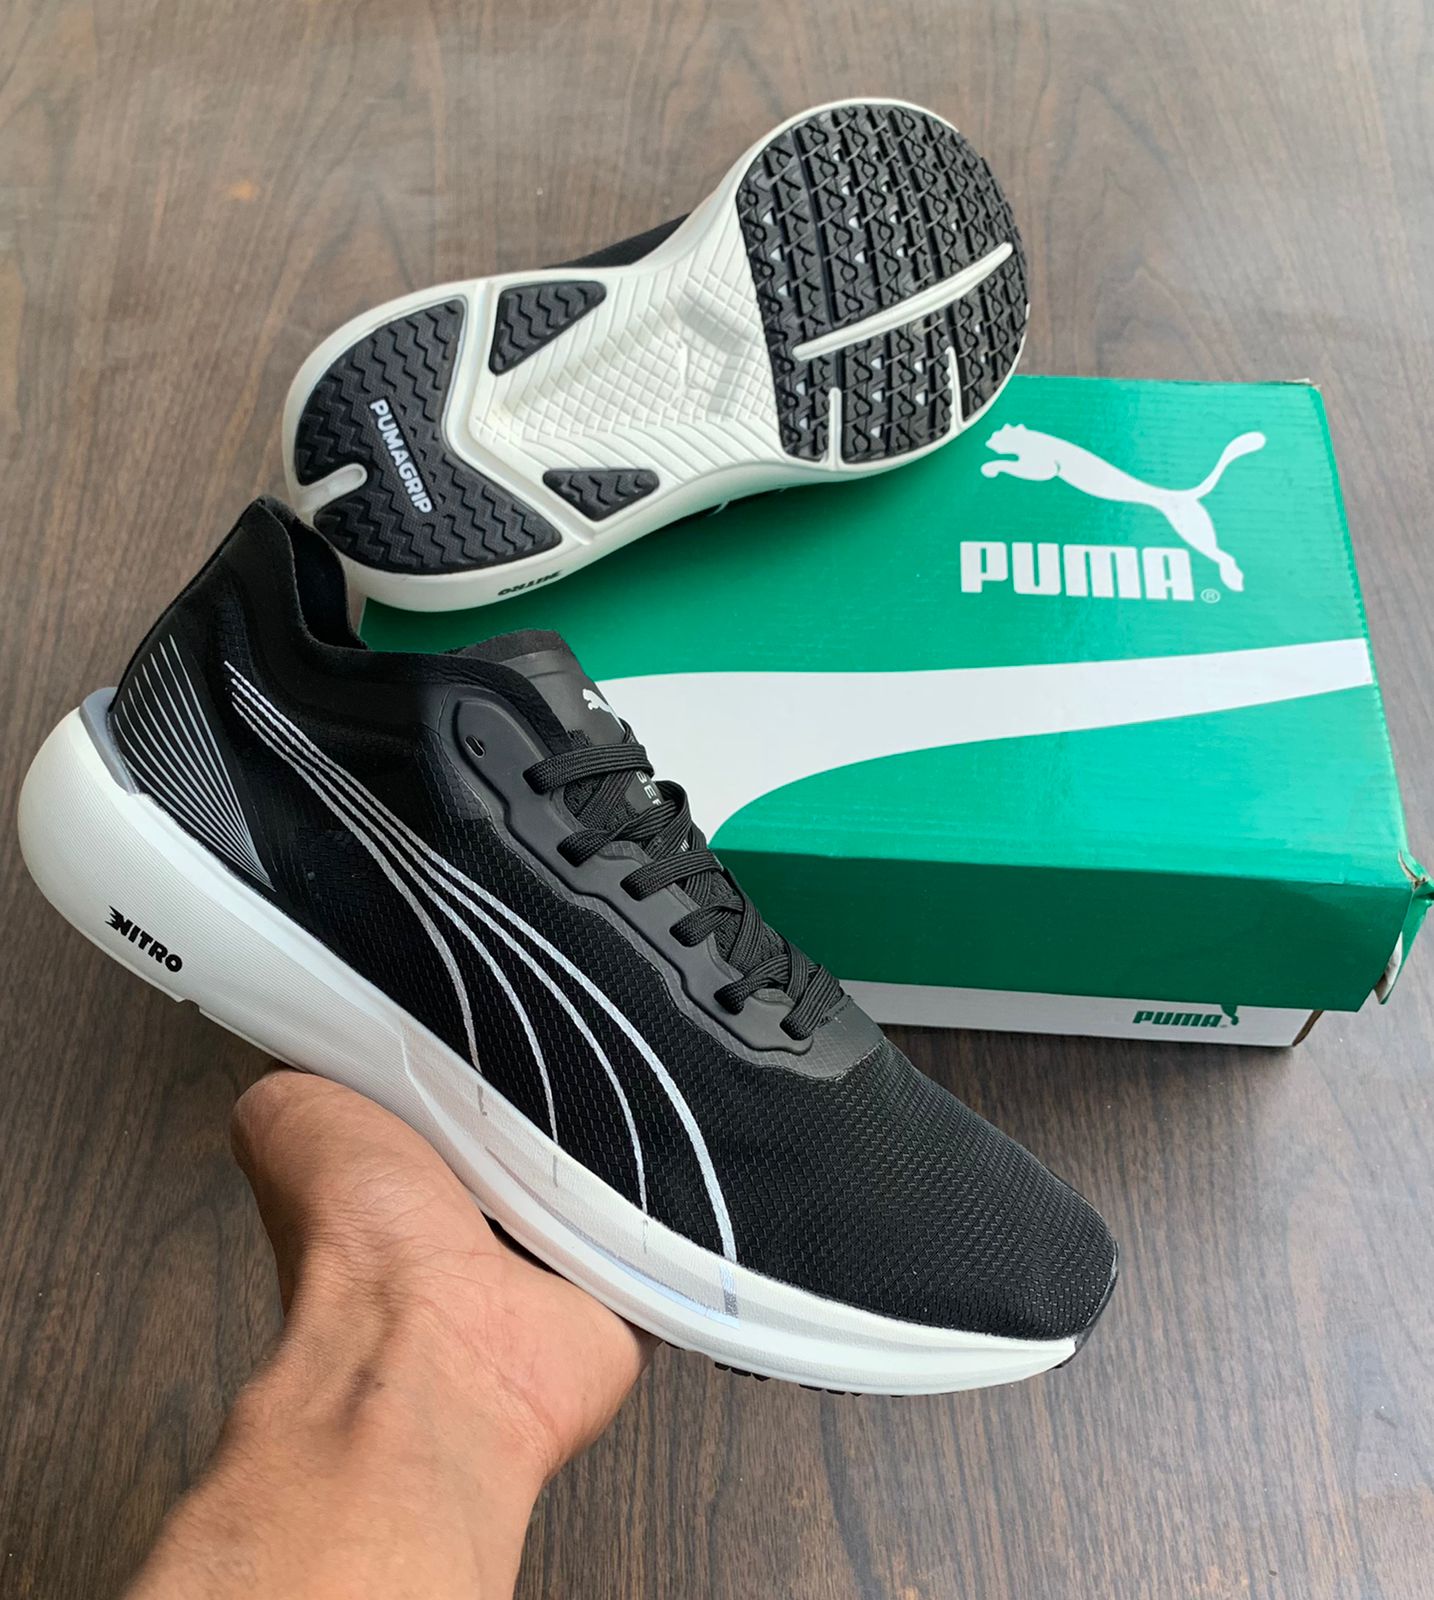 Shop Branded Puma nitro running shoes - shoeseller.in